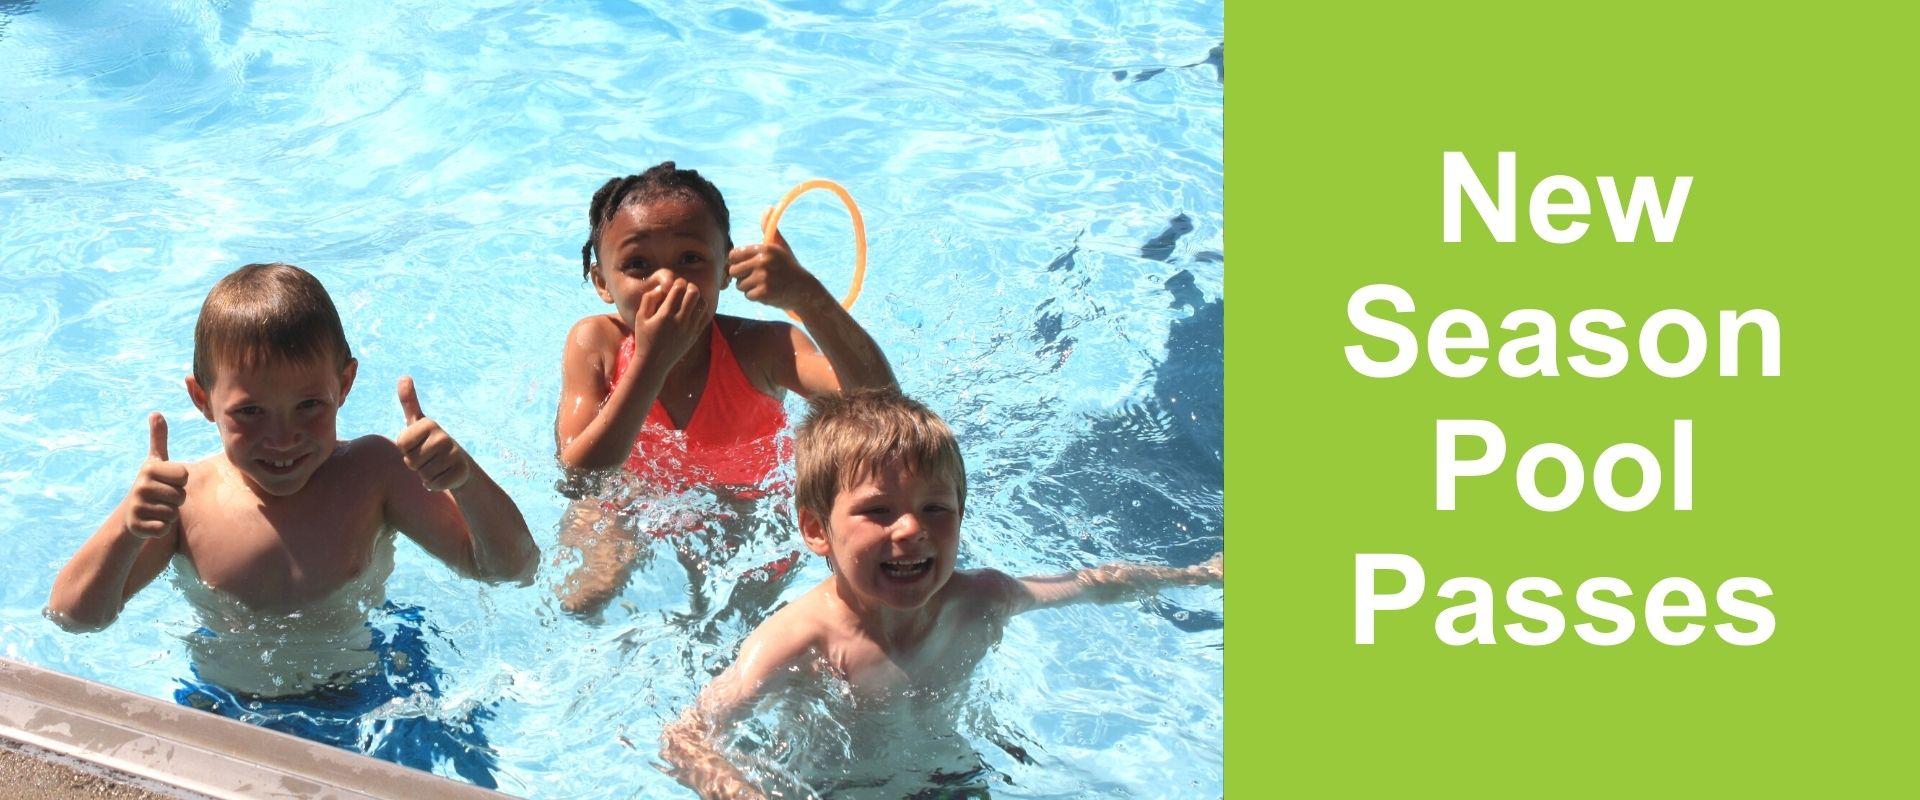 This image shows a graphic with text reading "New Season Pool Passes" next to an image showing three young kids swimming in a pool, smiling and giving thumbs up to the camera.